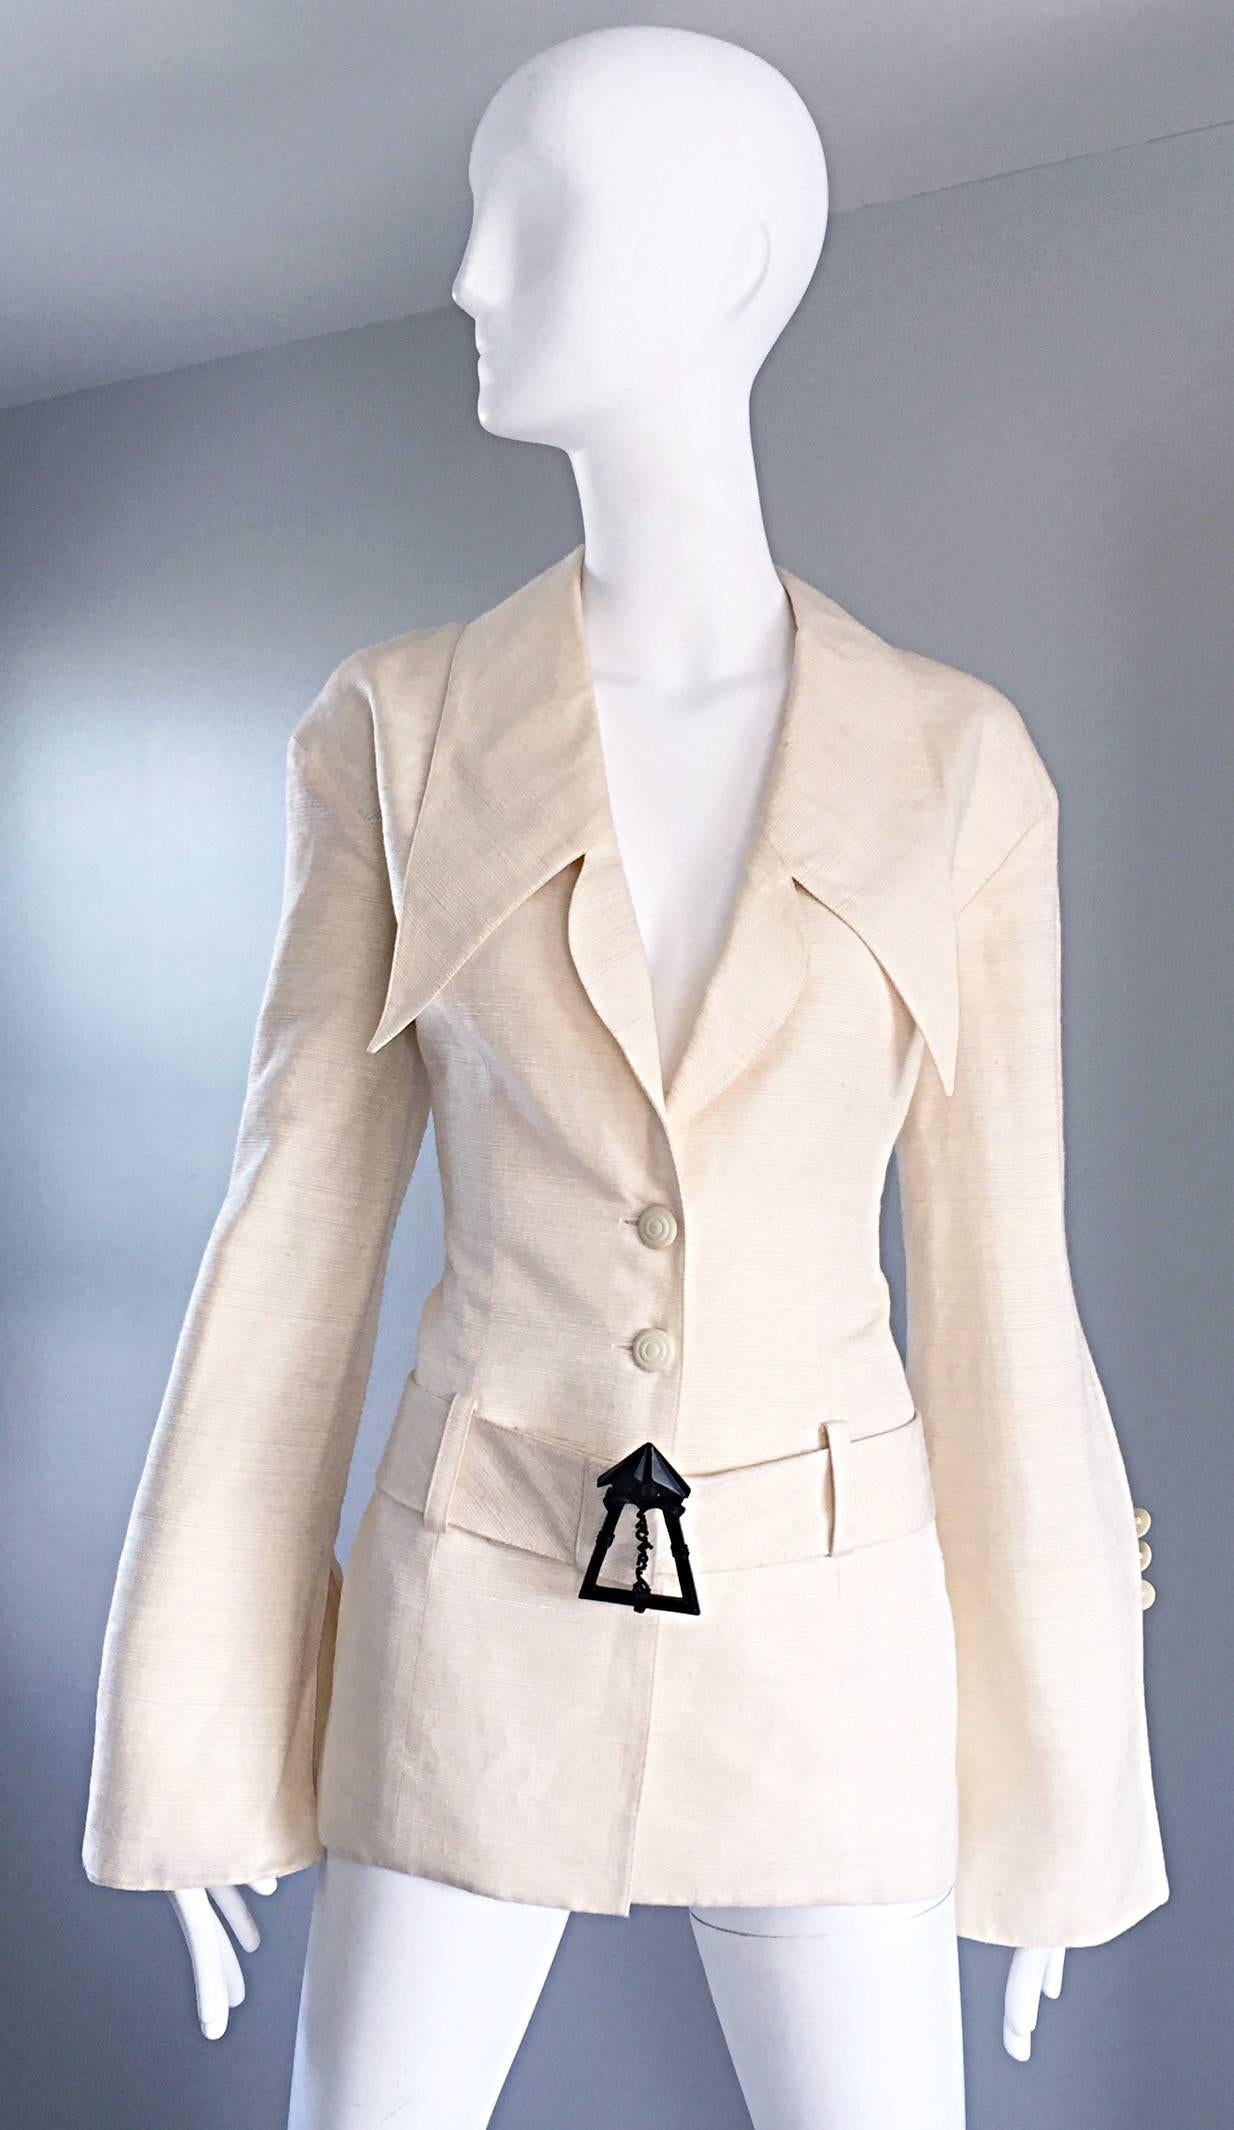 Incredible vintage KARL LAGERFELD for NEIMAN MARCUS ivory / off-white silk shantung belted jacket! Features amazing oversized collars, with chic bell sleeves. Detachable belt features a clock tower spelling out 'Lagerfeld.' Buttons up the bodice,